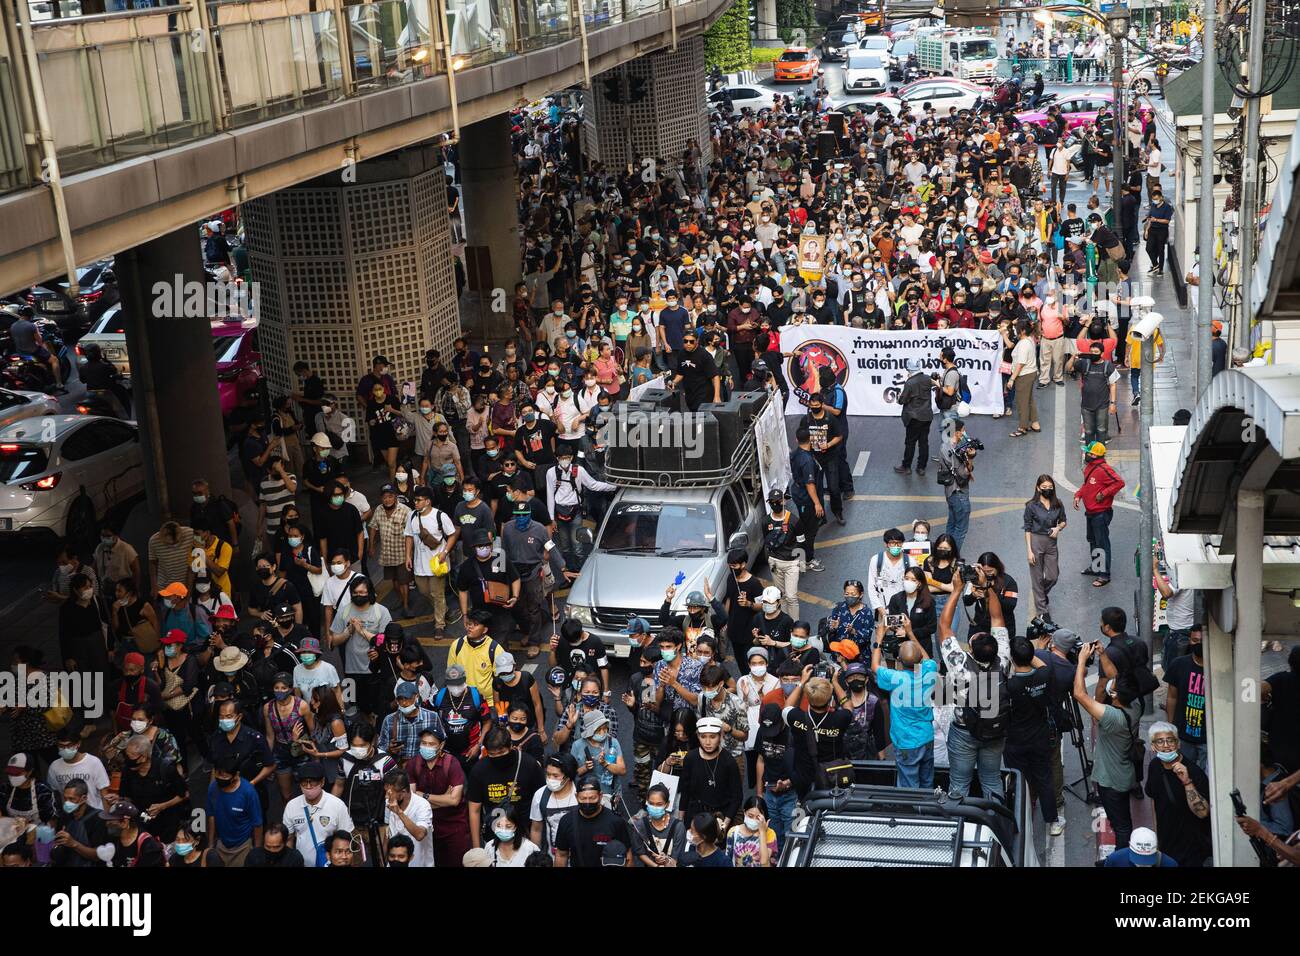 Protesters marching from Ratchaprasong intersection to the Royal Thai ...